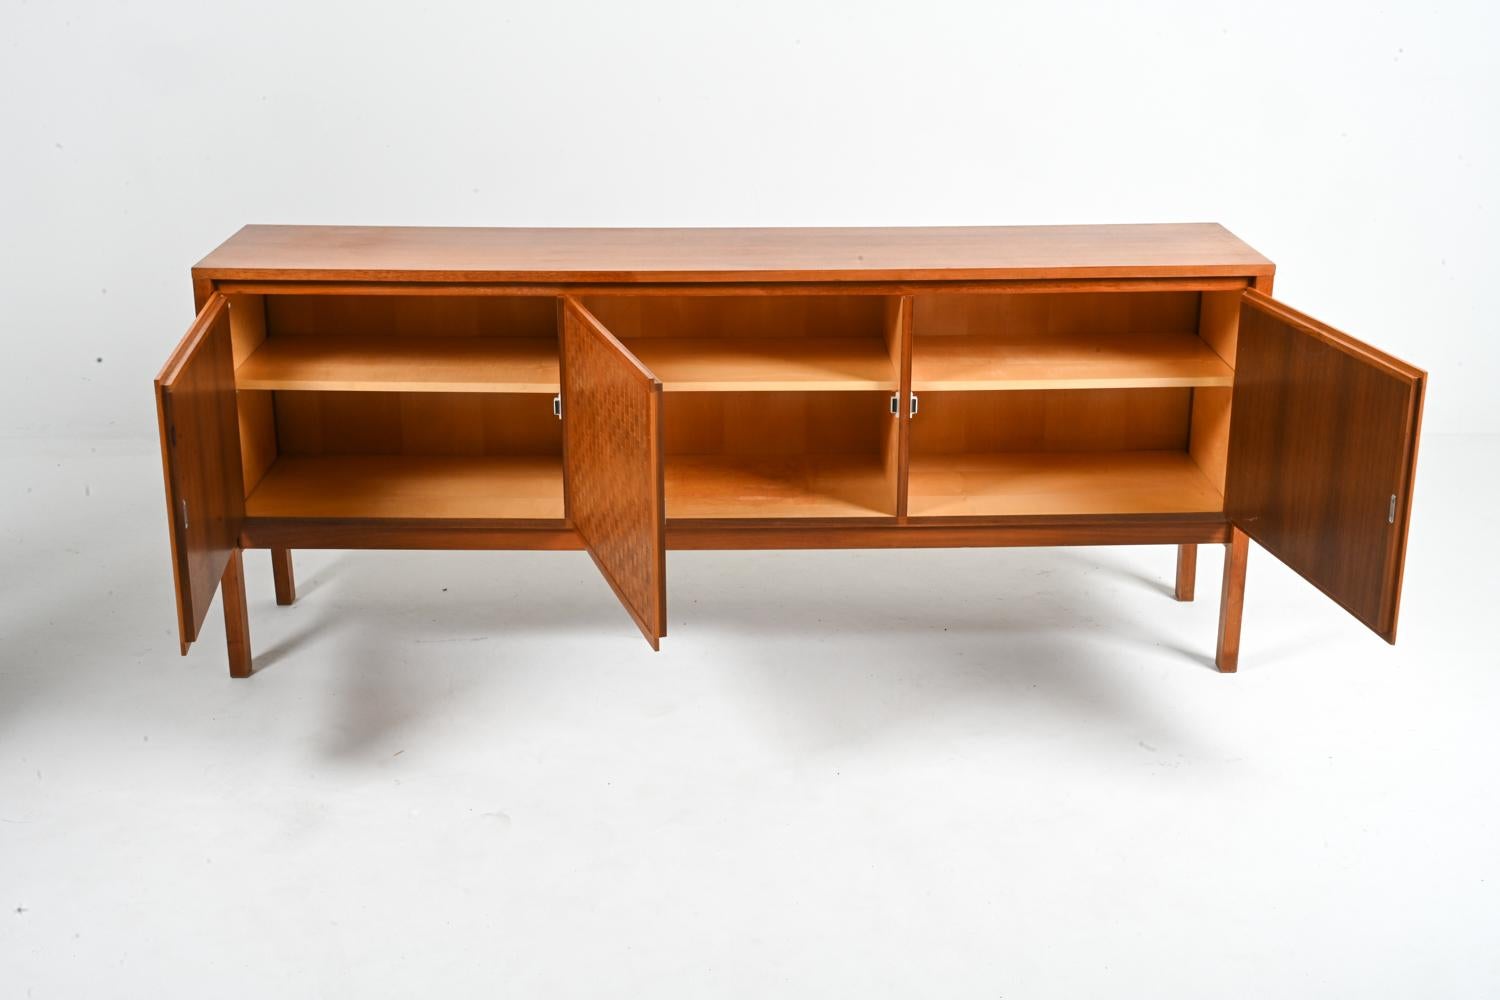 German Mid-Century Teak Woven-Front Sideboard by Leo Bub, c. 1960 For Sale 2